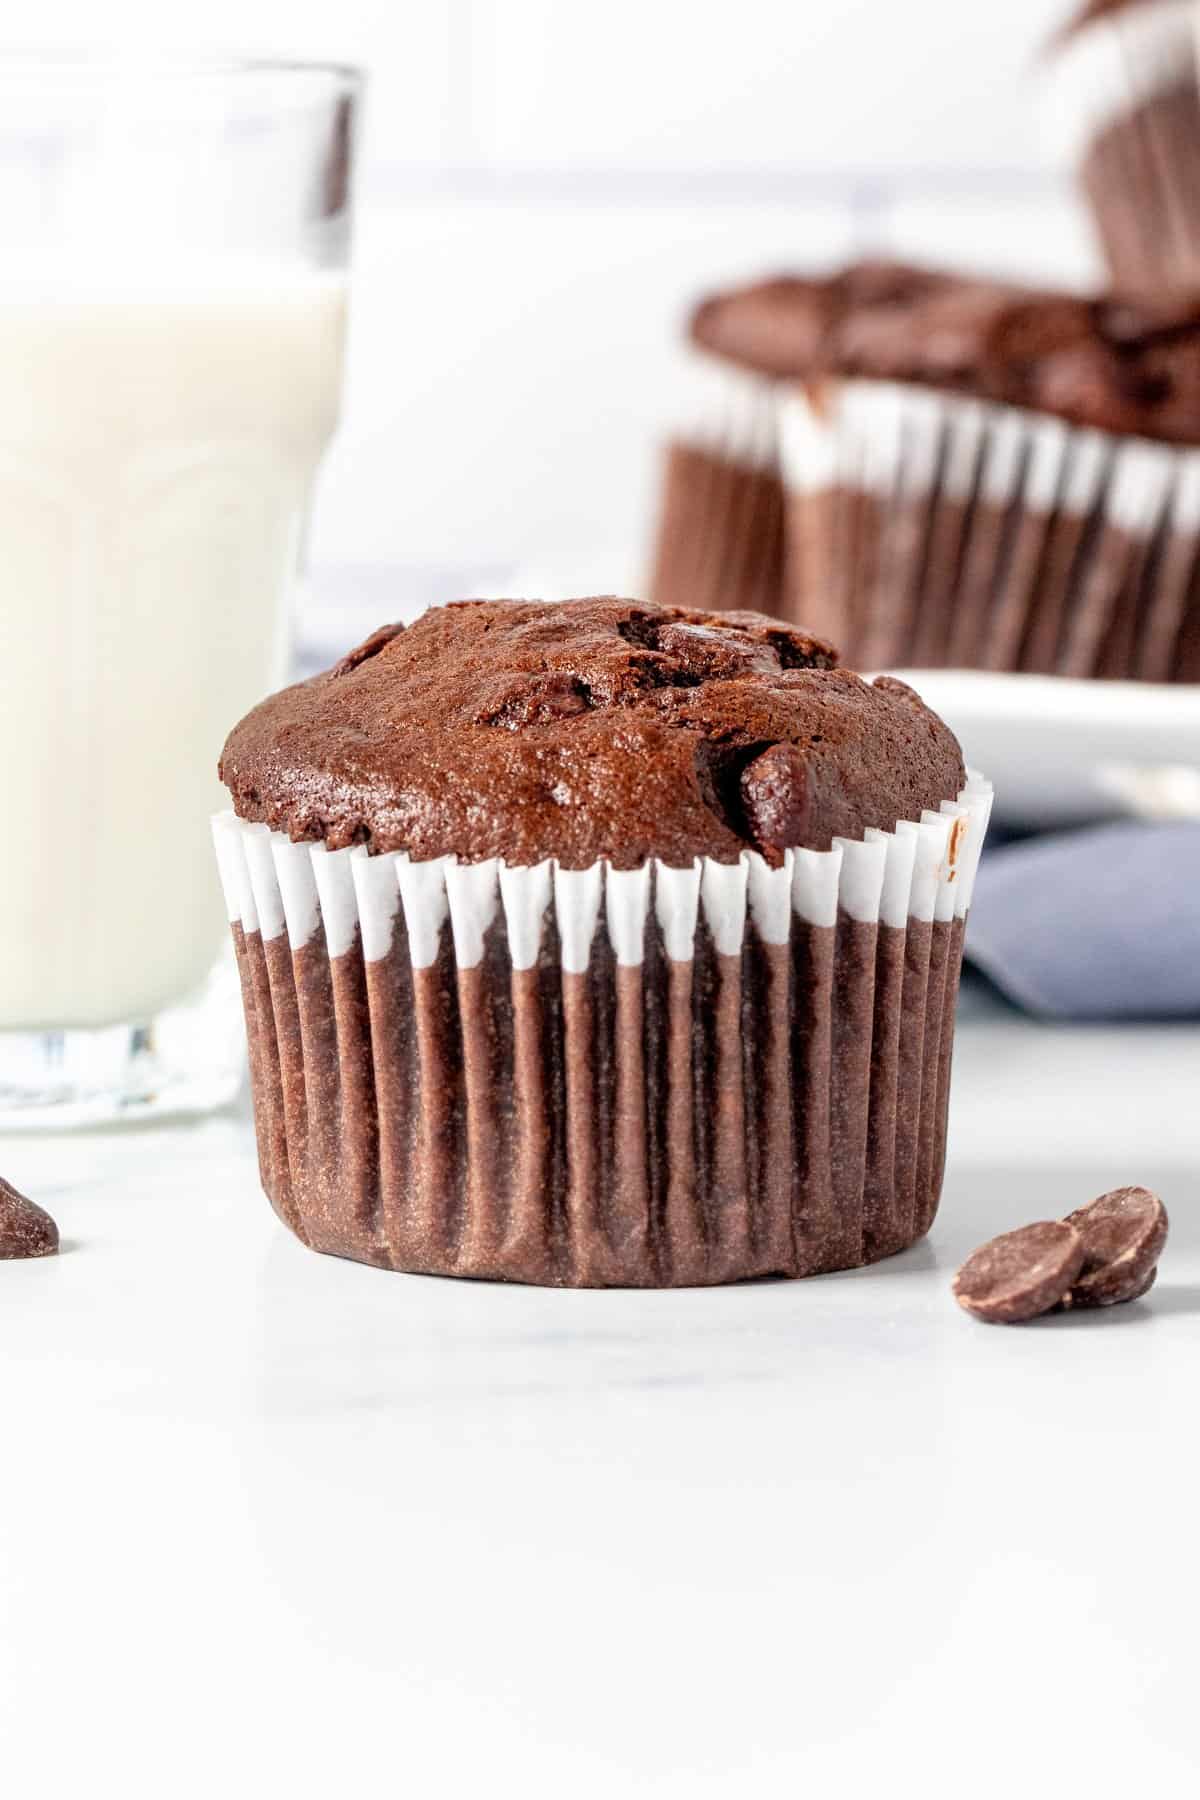 Chocolate banana muffin with glass of milk and plate of muffins